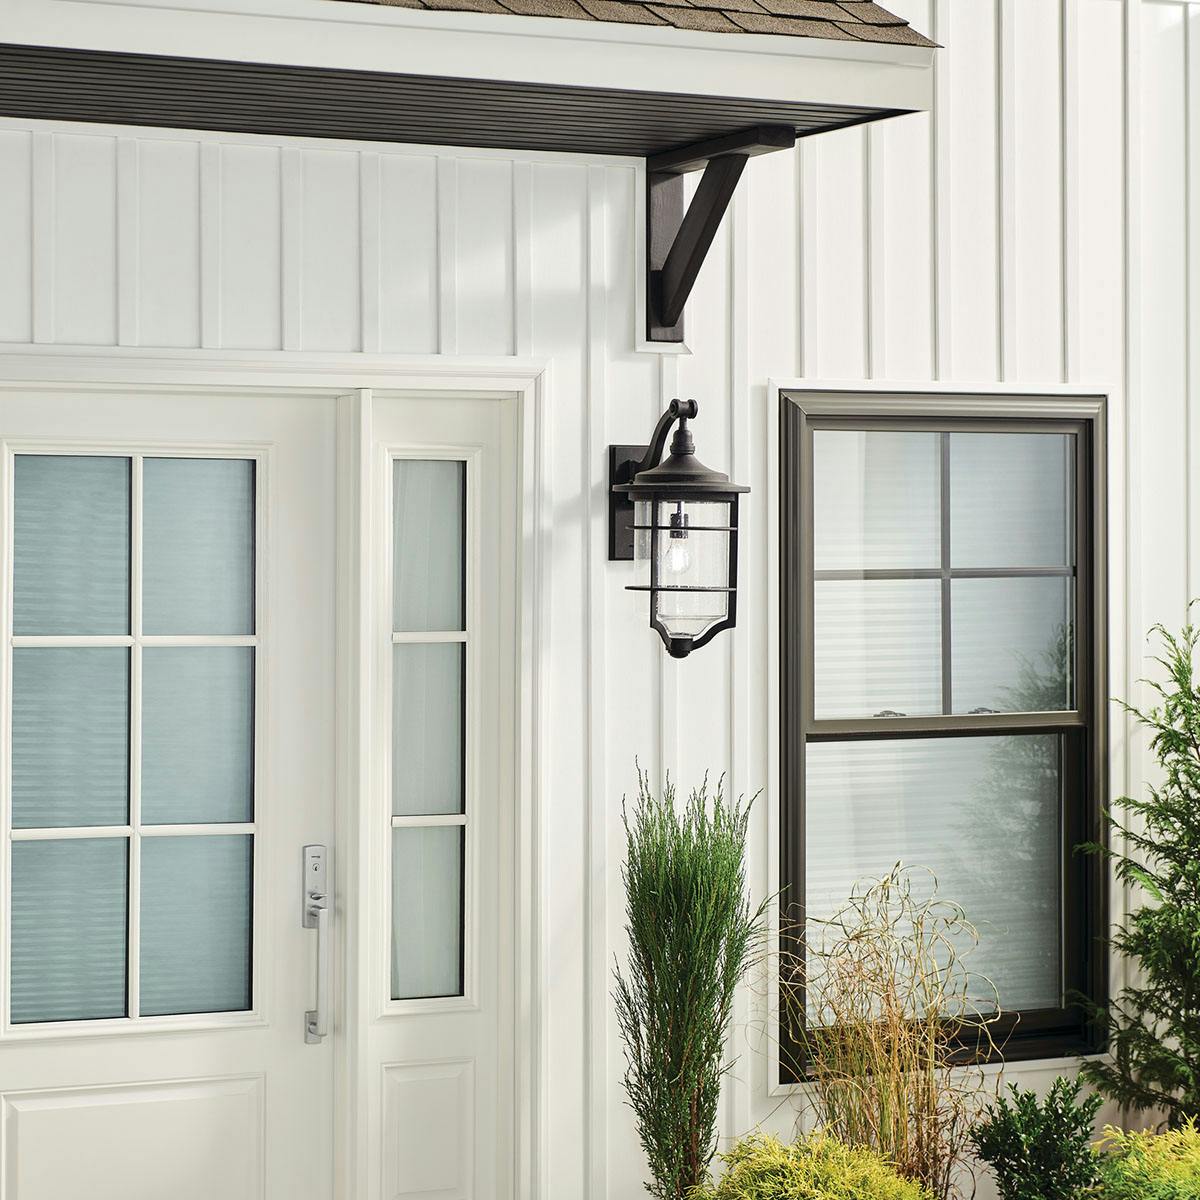 Day time Exterior image featuring Royal Marine outdoor wall light 49128DBK